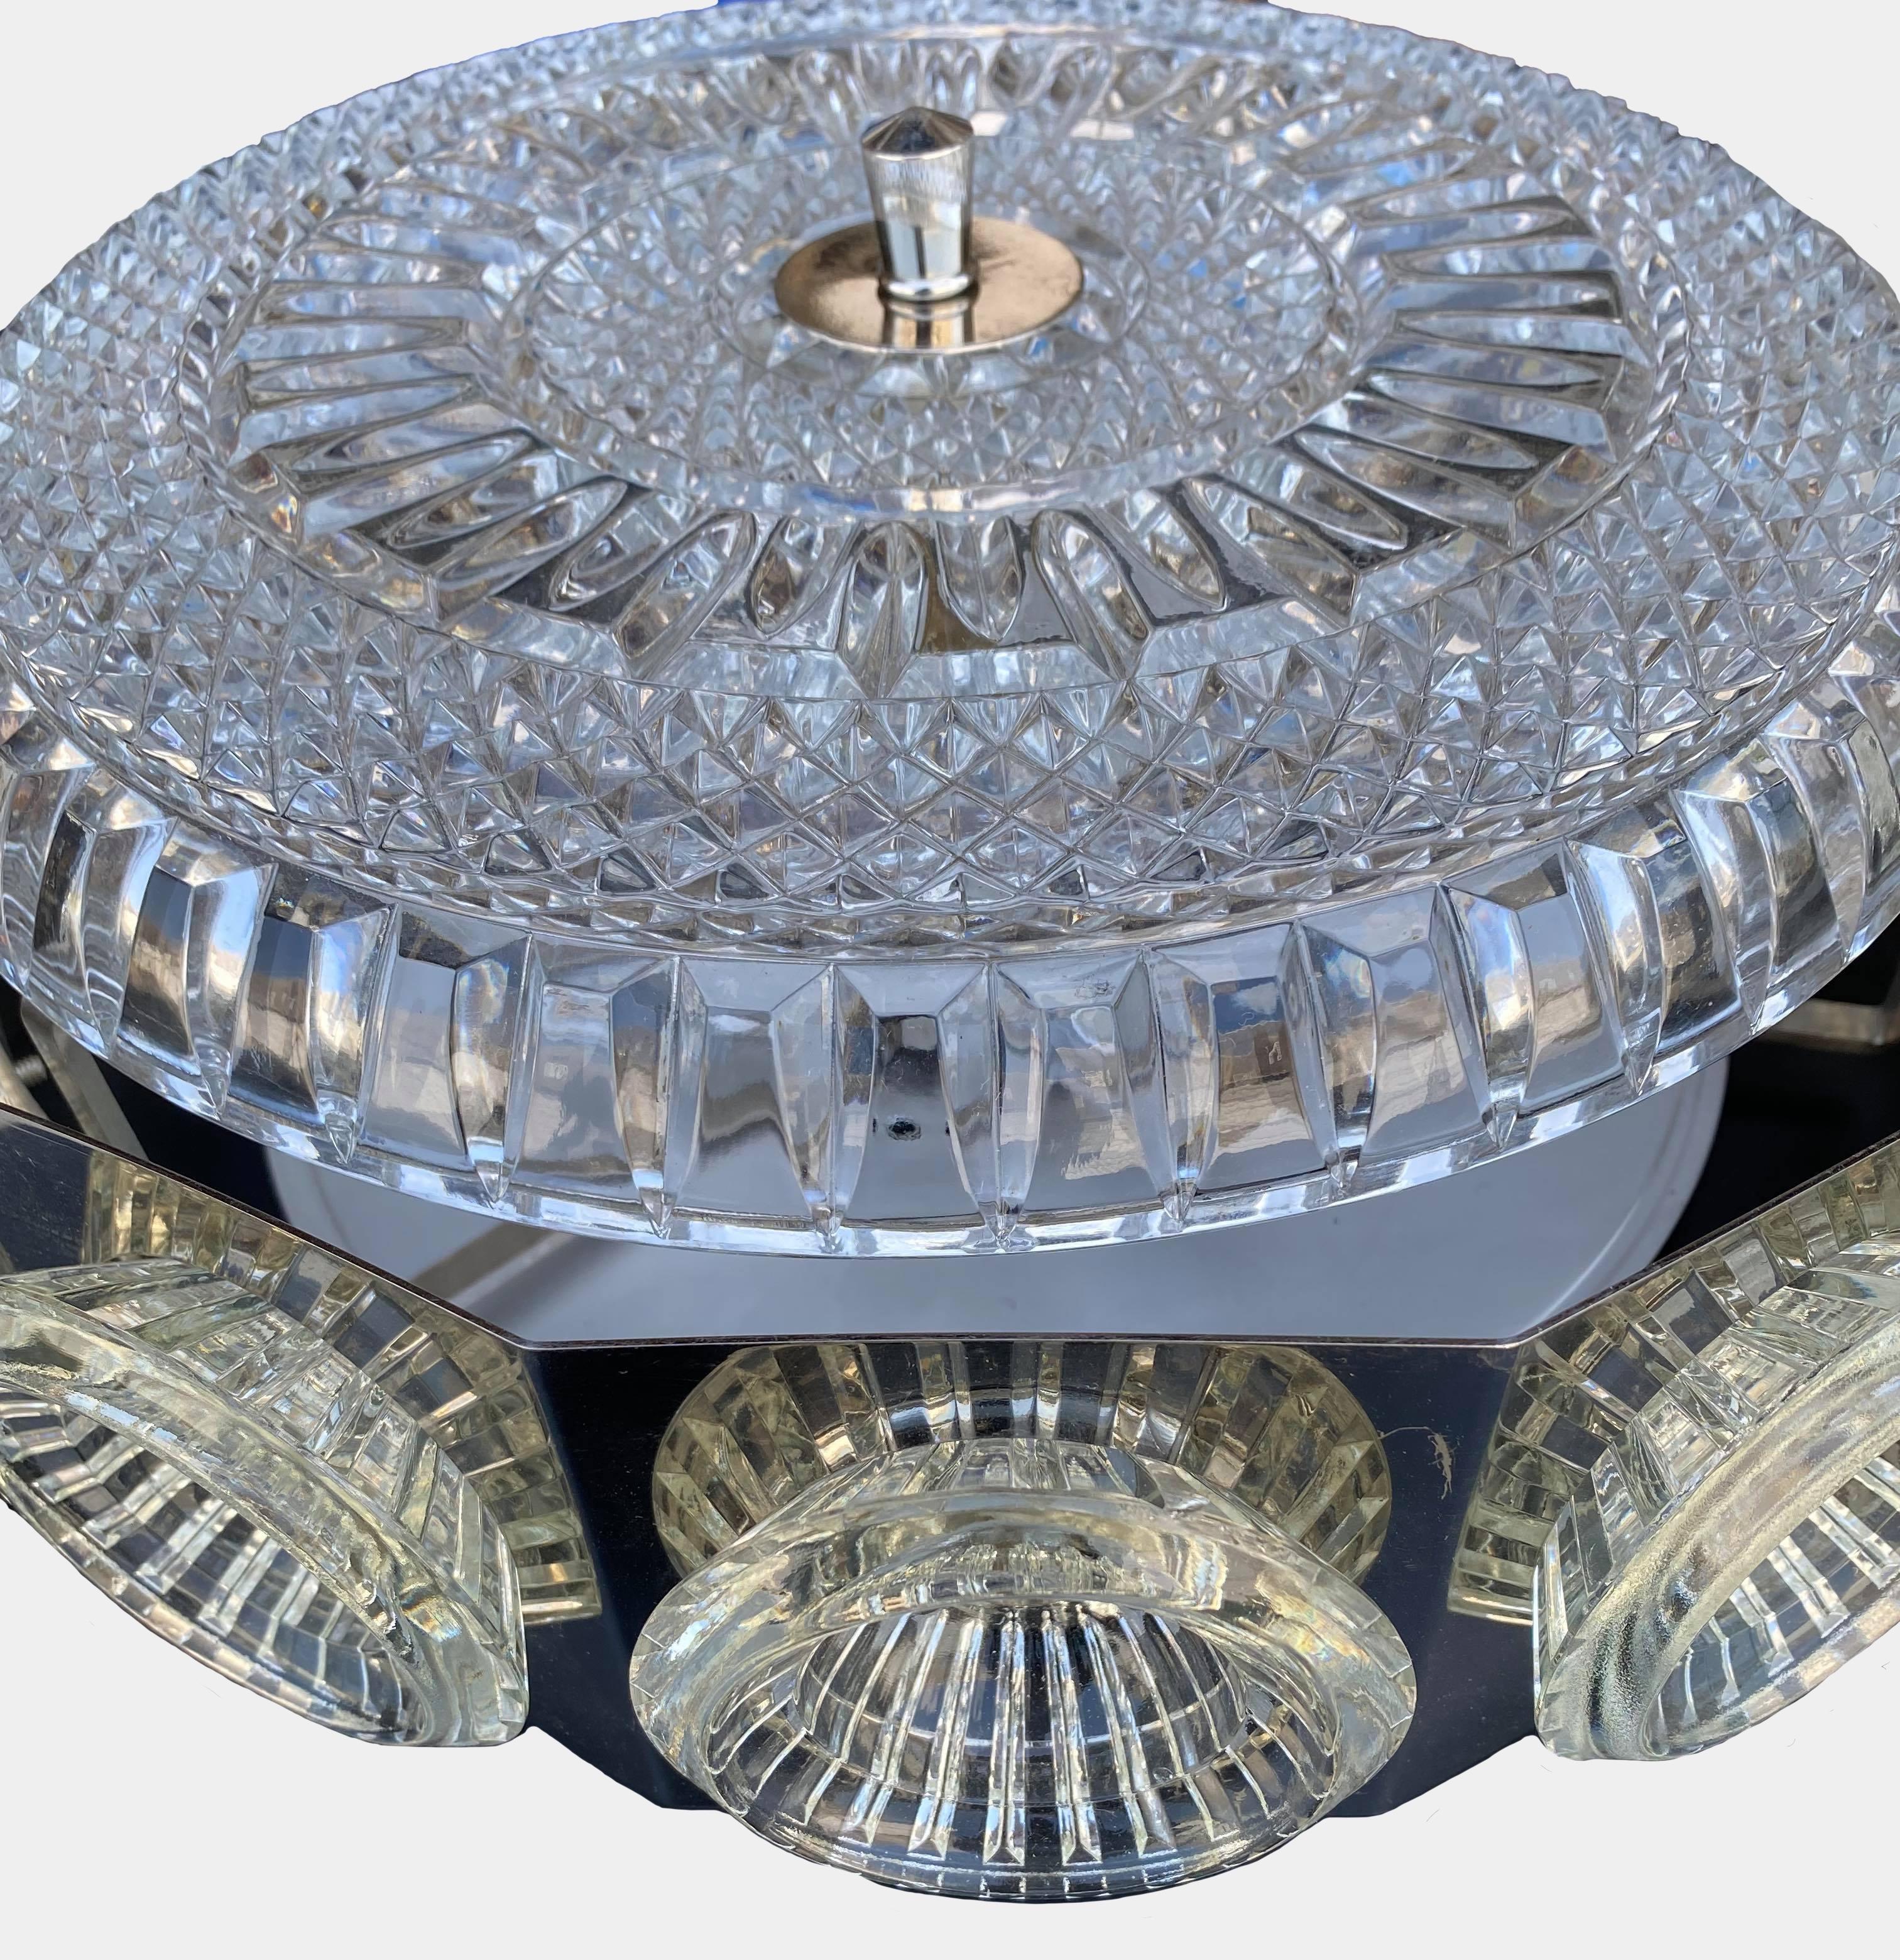 Chrome and glass fixture by Orrefors of Sweden. Newly rewired for four candelabra bulbs.